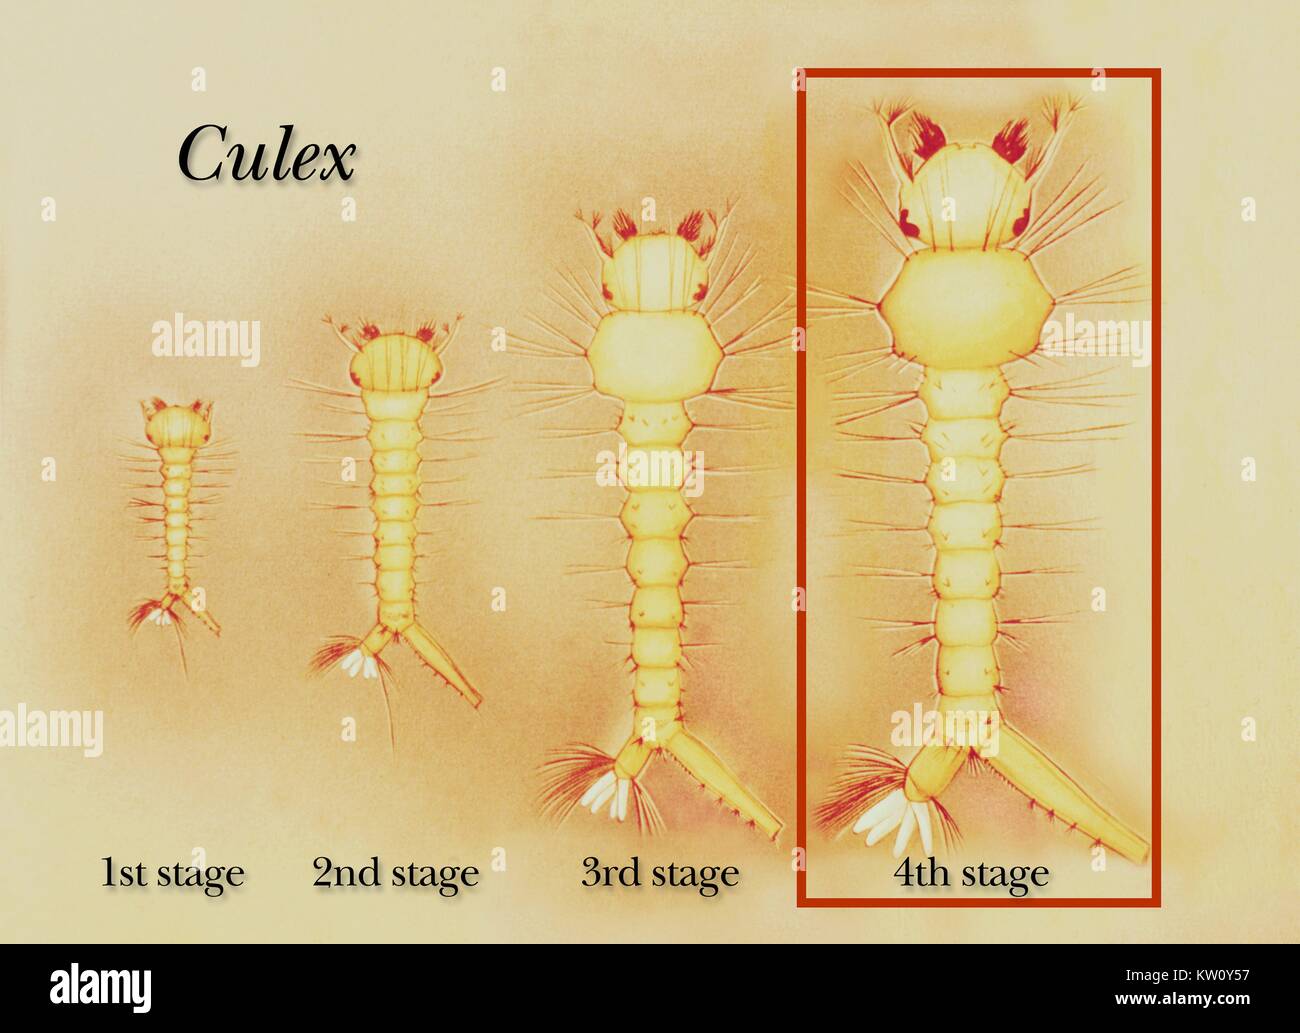 Illustration of the first, second, third and fourth growth stages of a Culex mosquito larva. There are four growth stages, or instars, in the development of the Culex mosquito larva. 'Instar' is a term used to designate a stage in the metamorphosis experienced by insect nymphs or larvae. Image courtesy CDC, 1975. Stock Photo